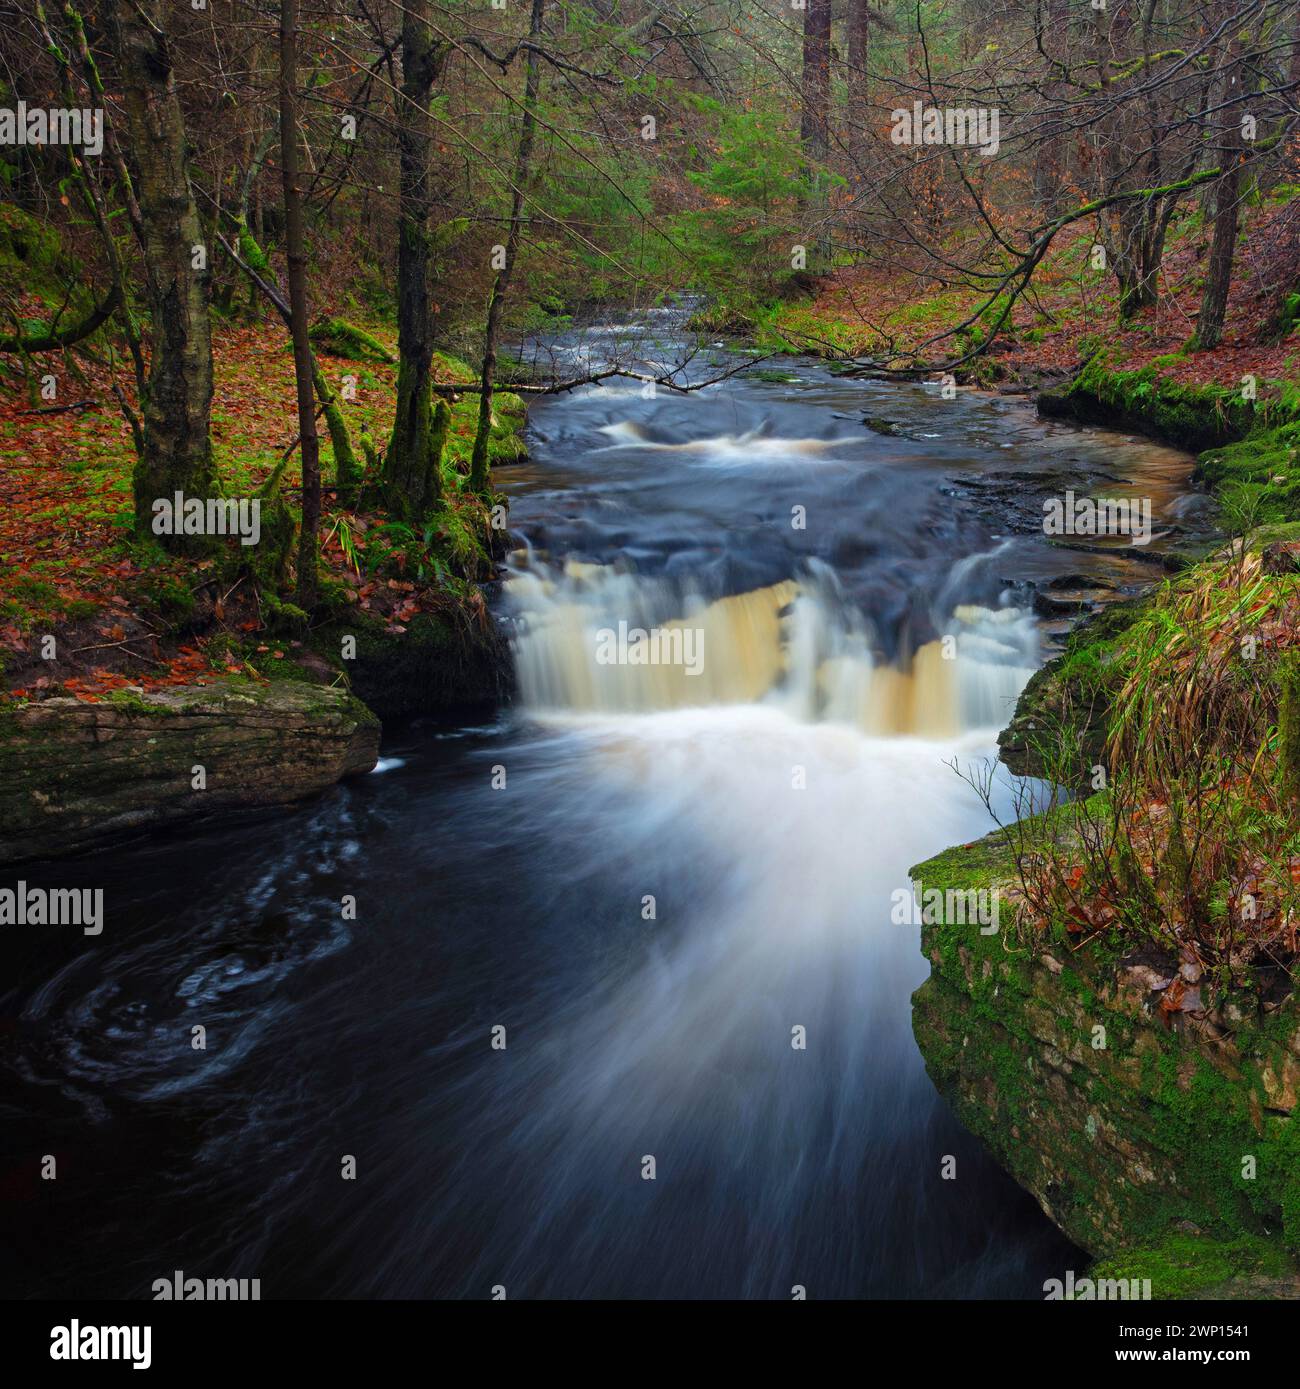 Fast flowing stream and waterfall, Hamsterley Forest, County Durham, England, UK. Stock Photo